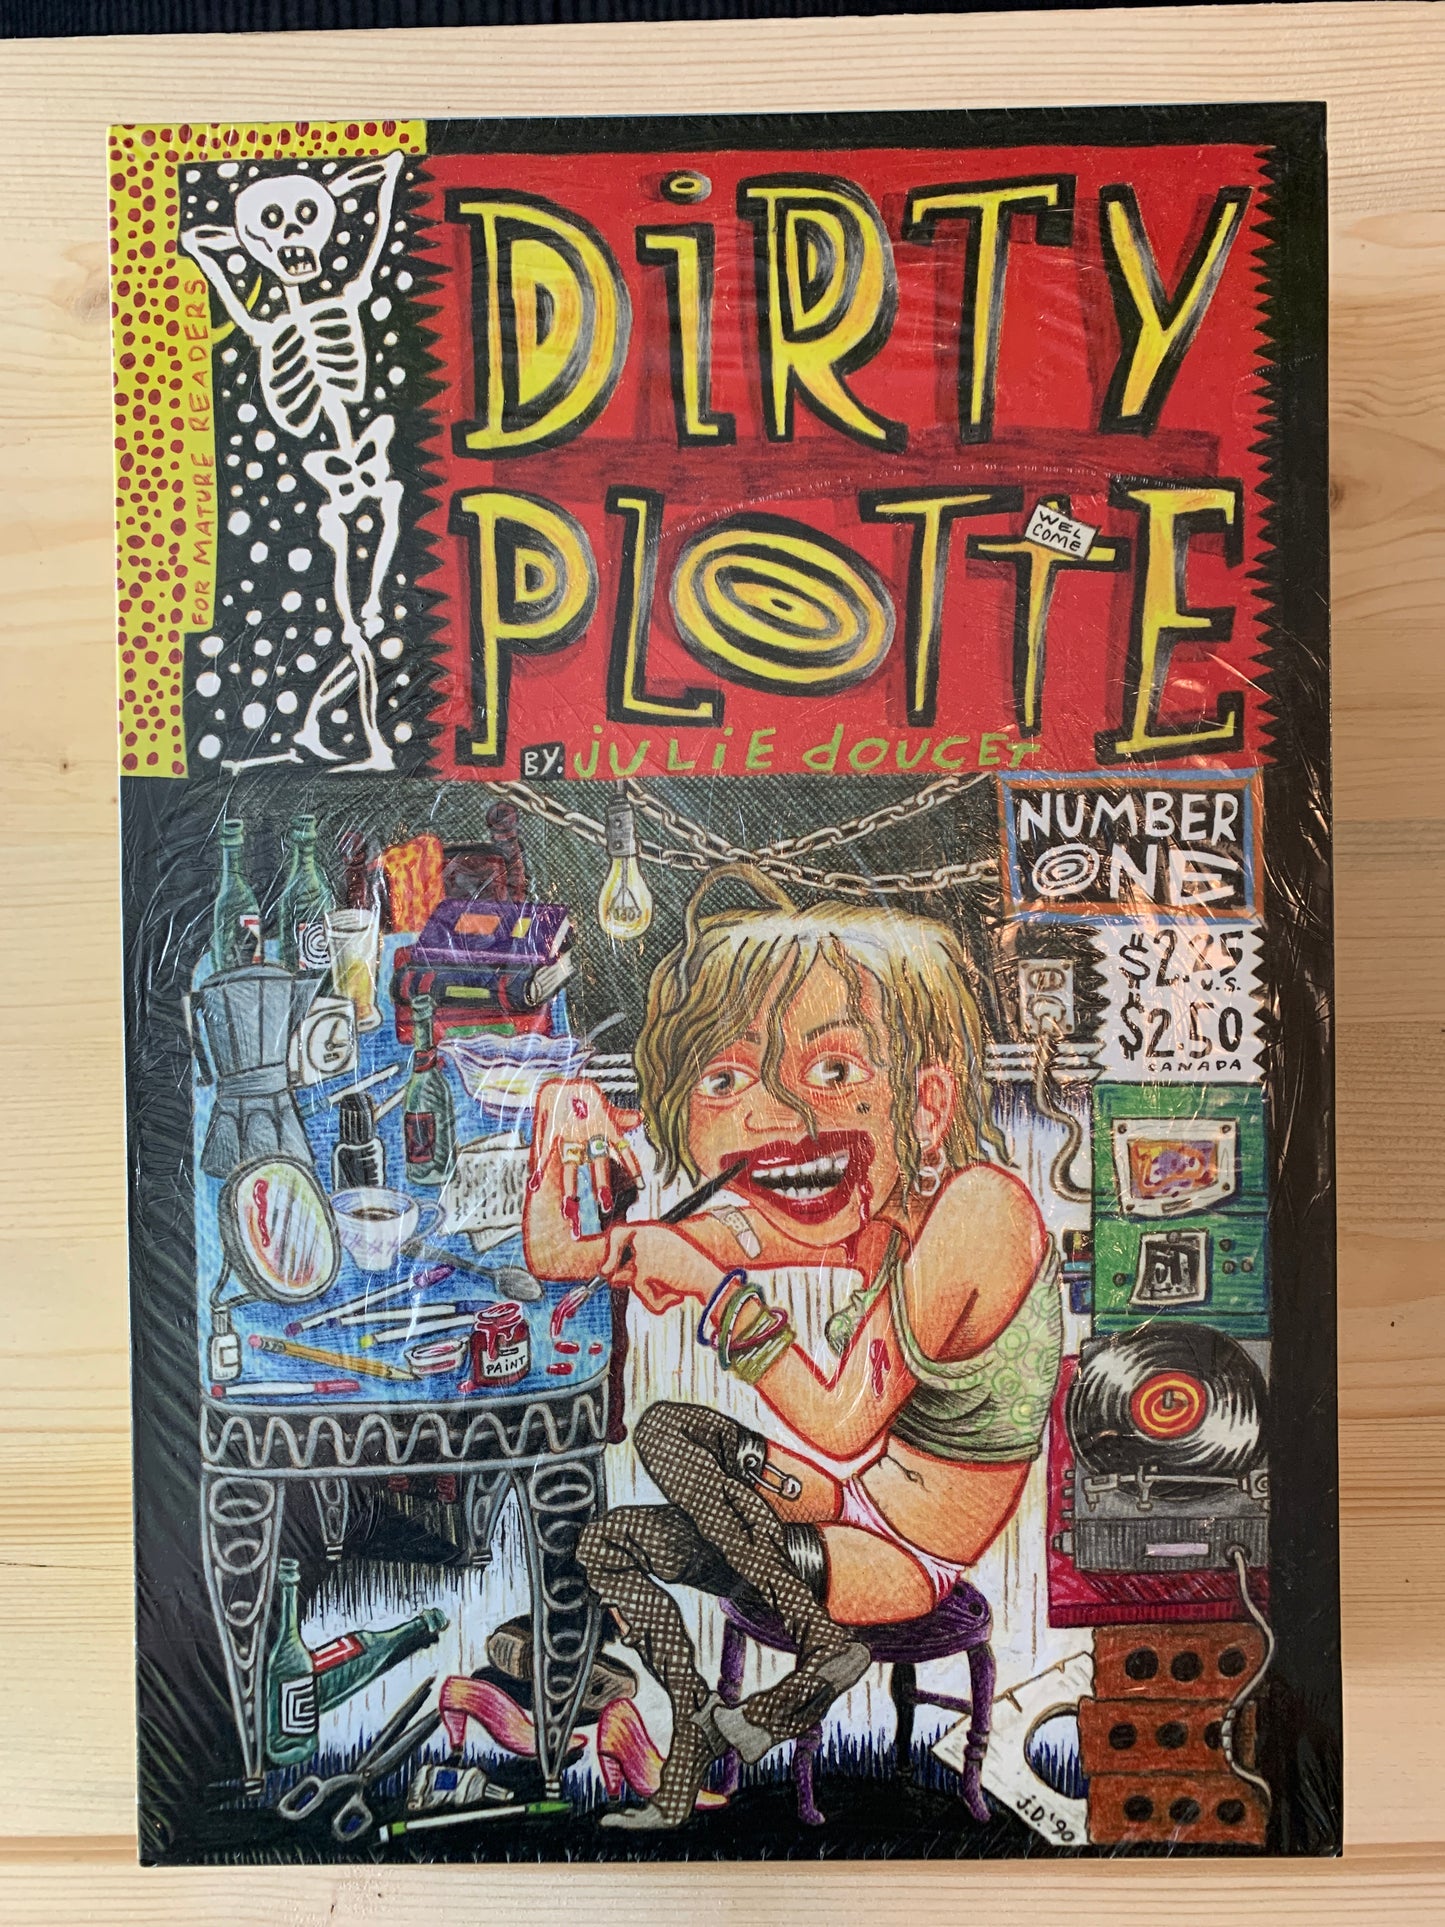 The Complete Dirty Plotte